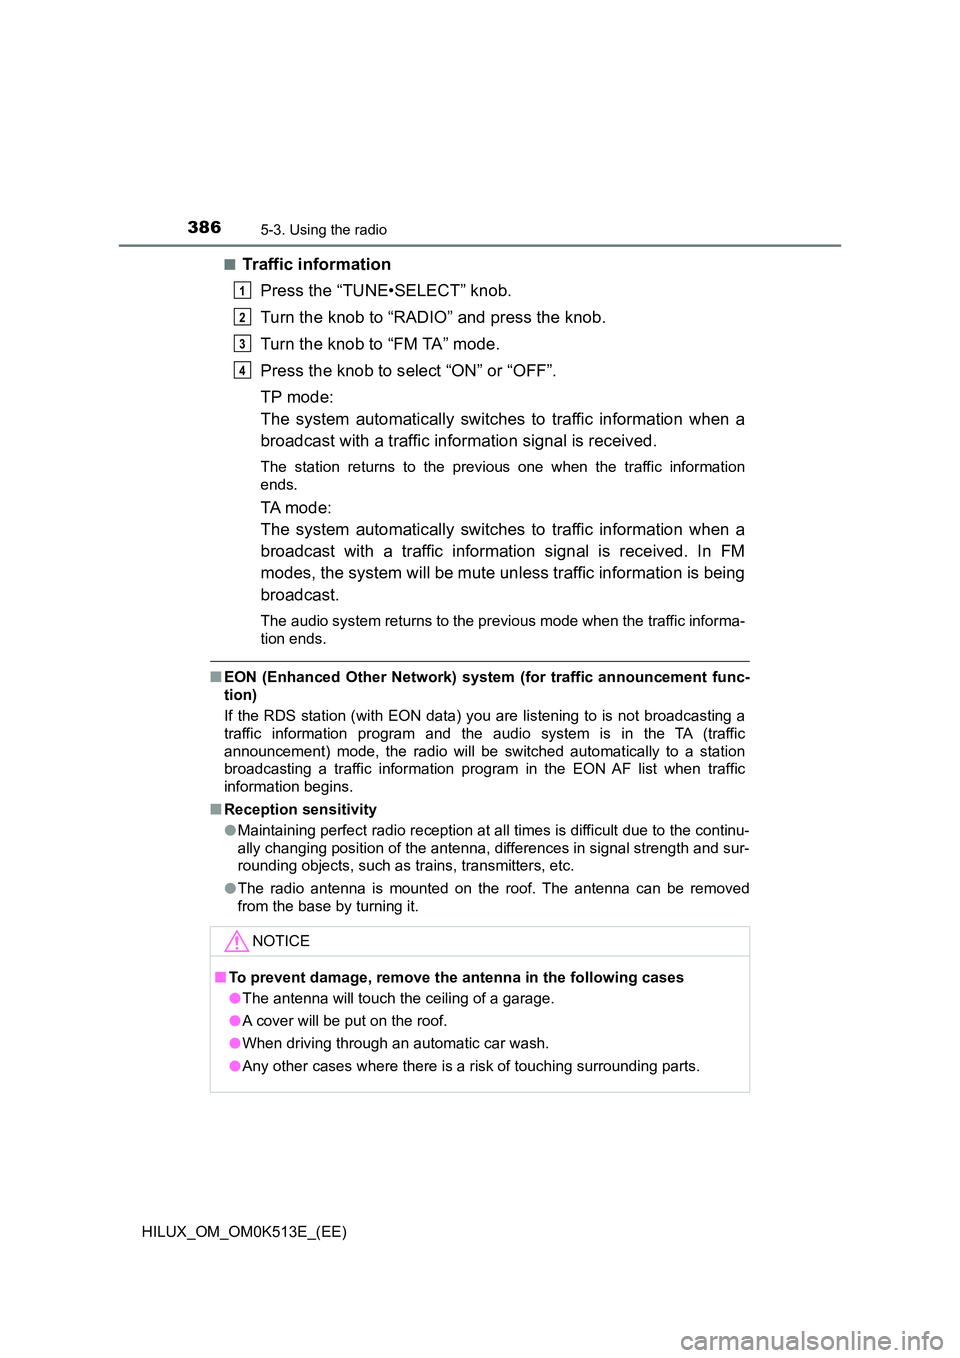 TOYOTA HILUX 2021  Owners Manual (in English) 3865-3. Using the radio
HILUX_OM_OM0K513E_(EE) 
�QTraffic information 
Press the “TUNE•SELECT” knob. 
Turn the knob to “RADIO” and press the knob. 
Turn the knob to “FM TA” mode. 
Press 